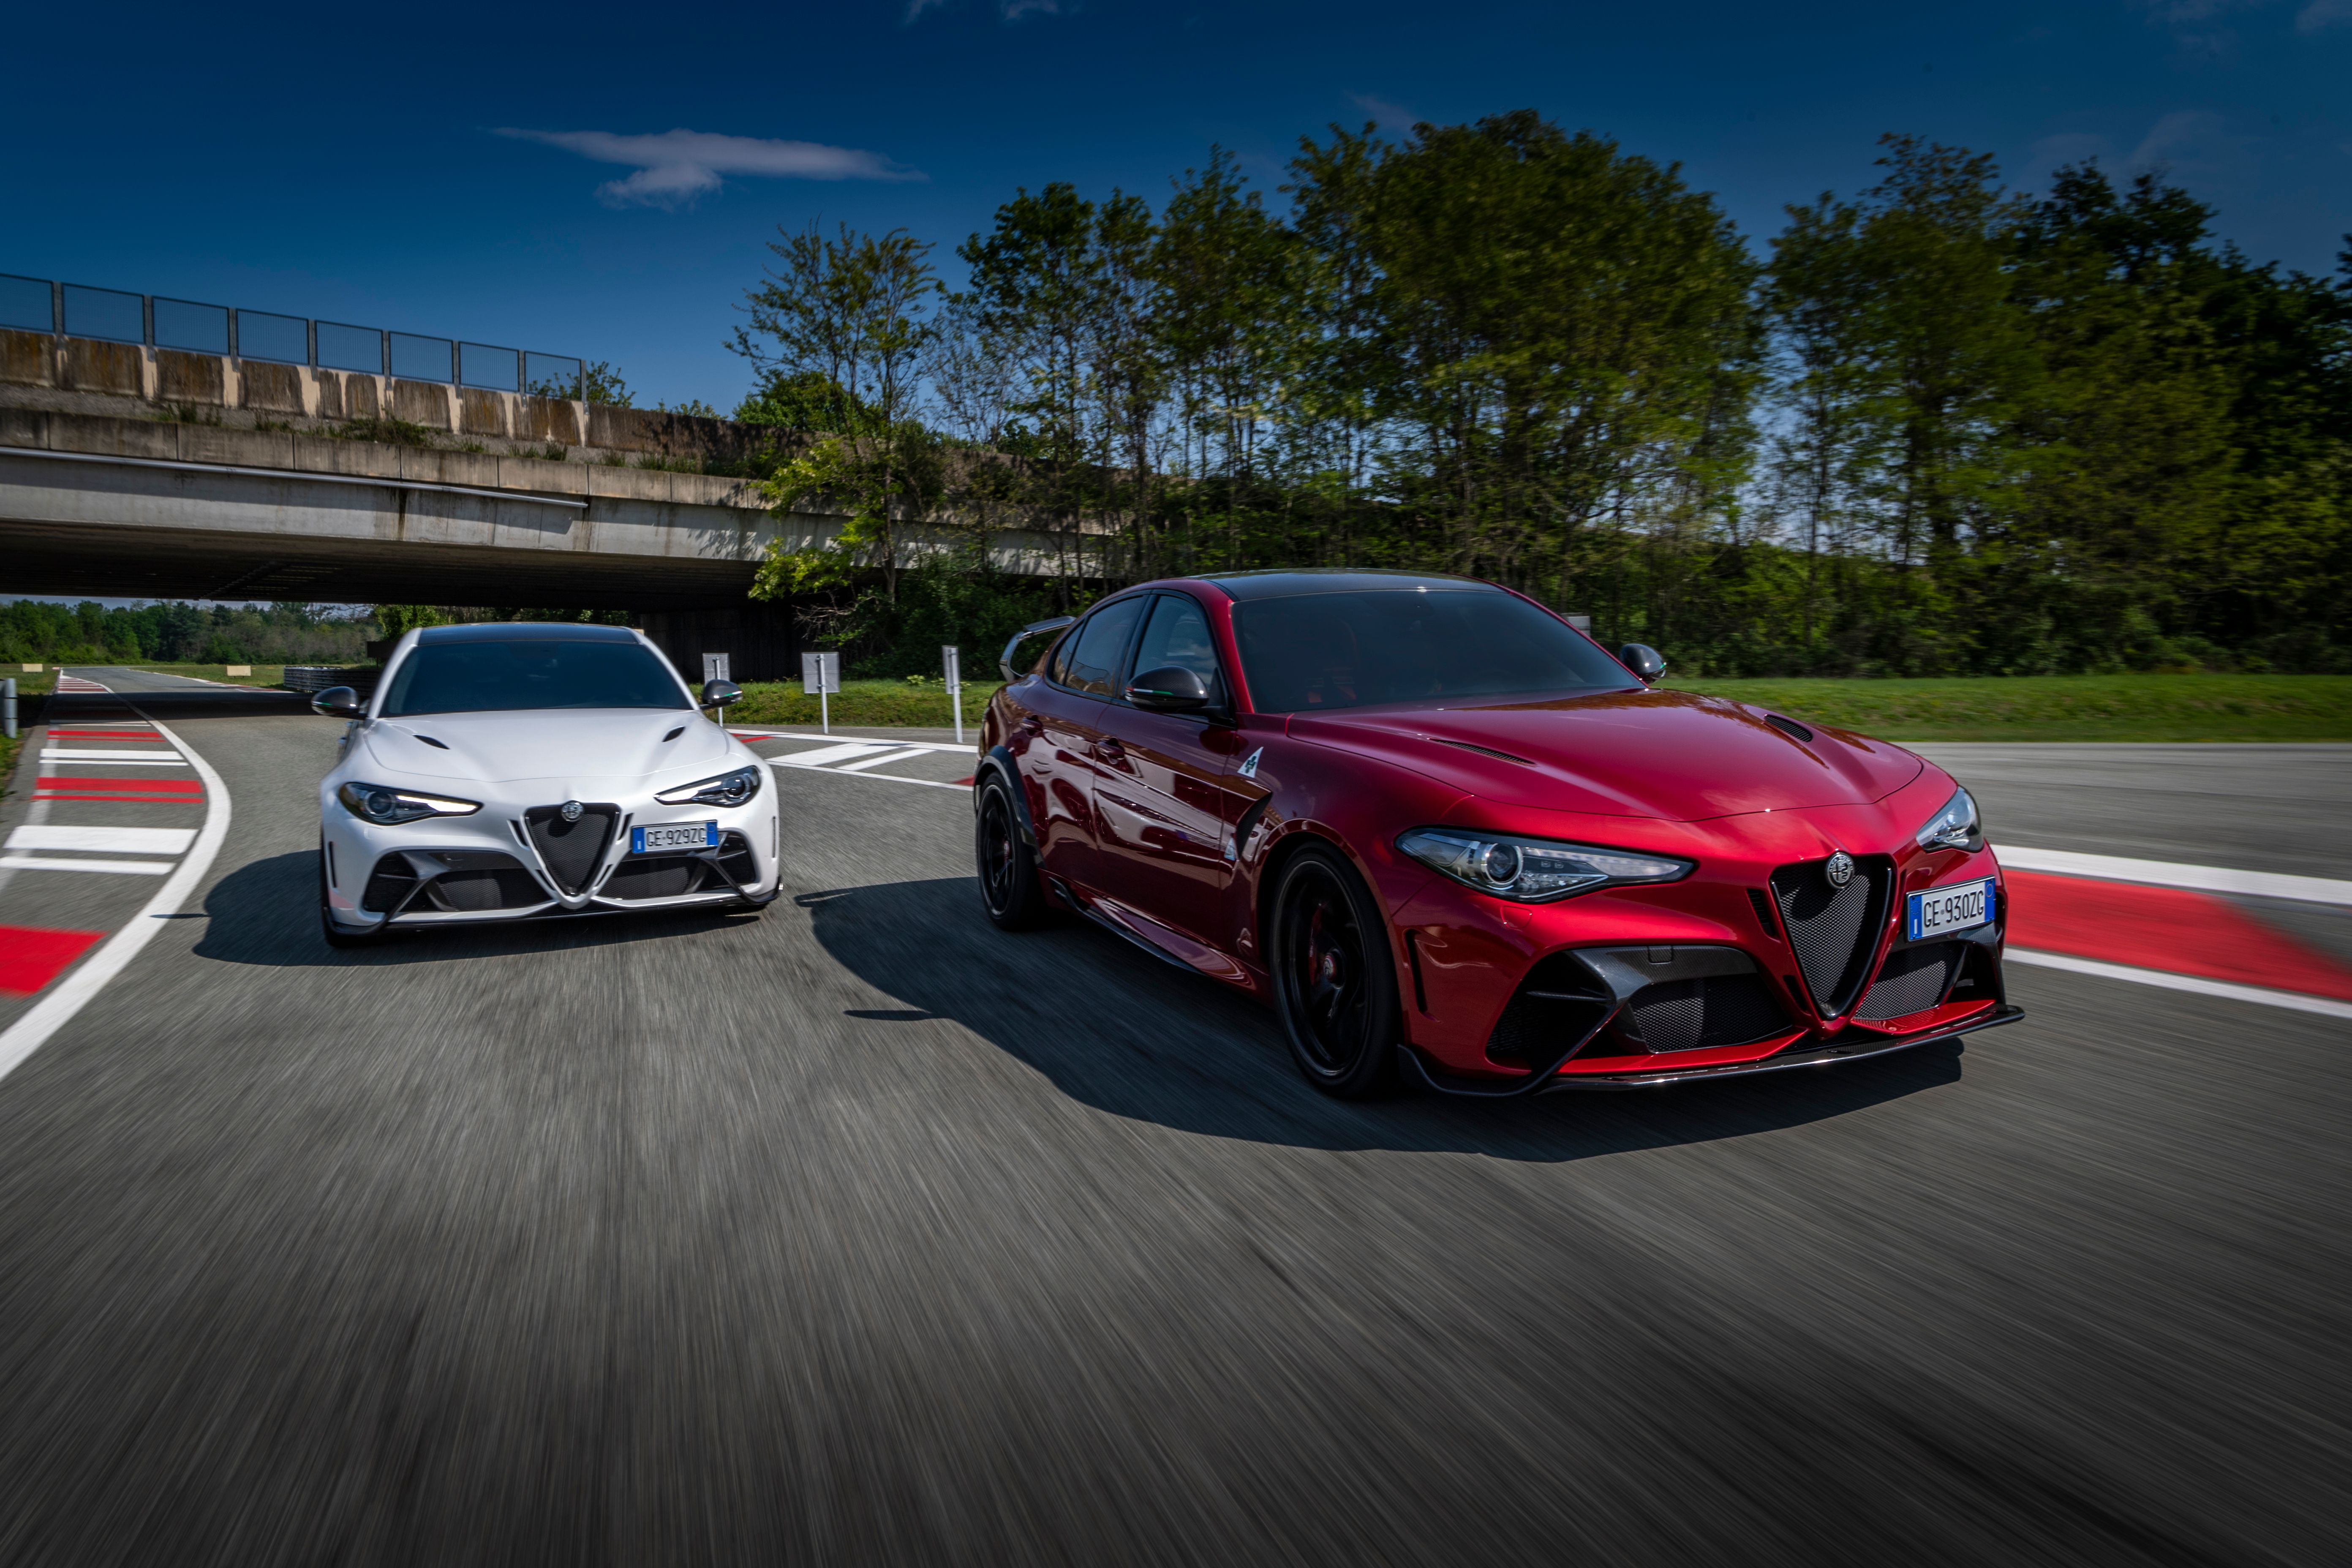 Alfa Romeo Giulia To Return For Its Second Generation As An EV